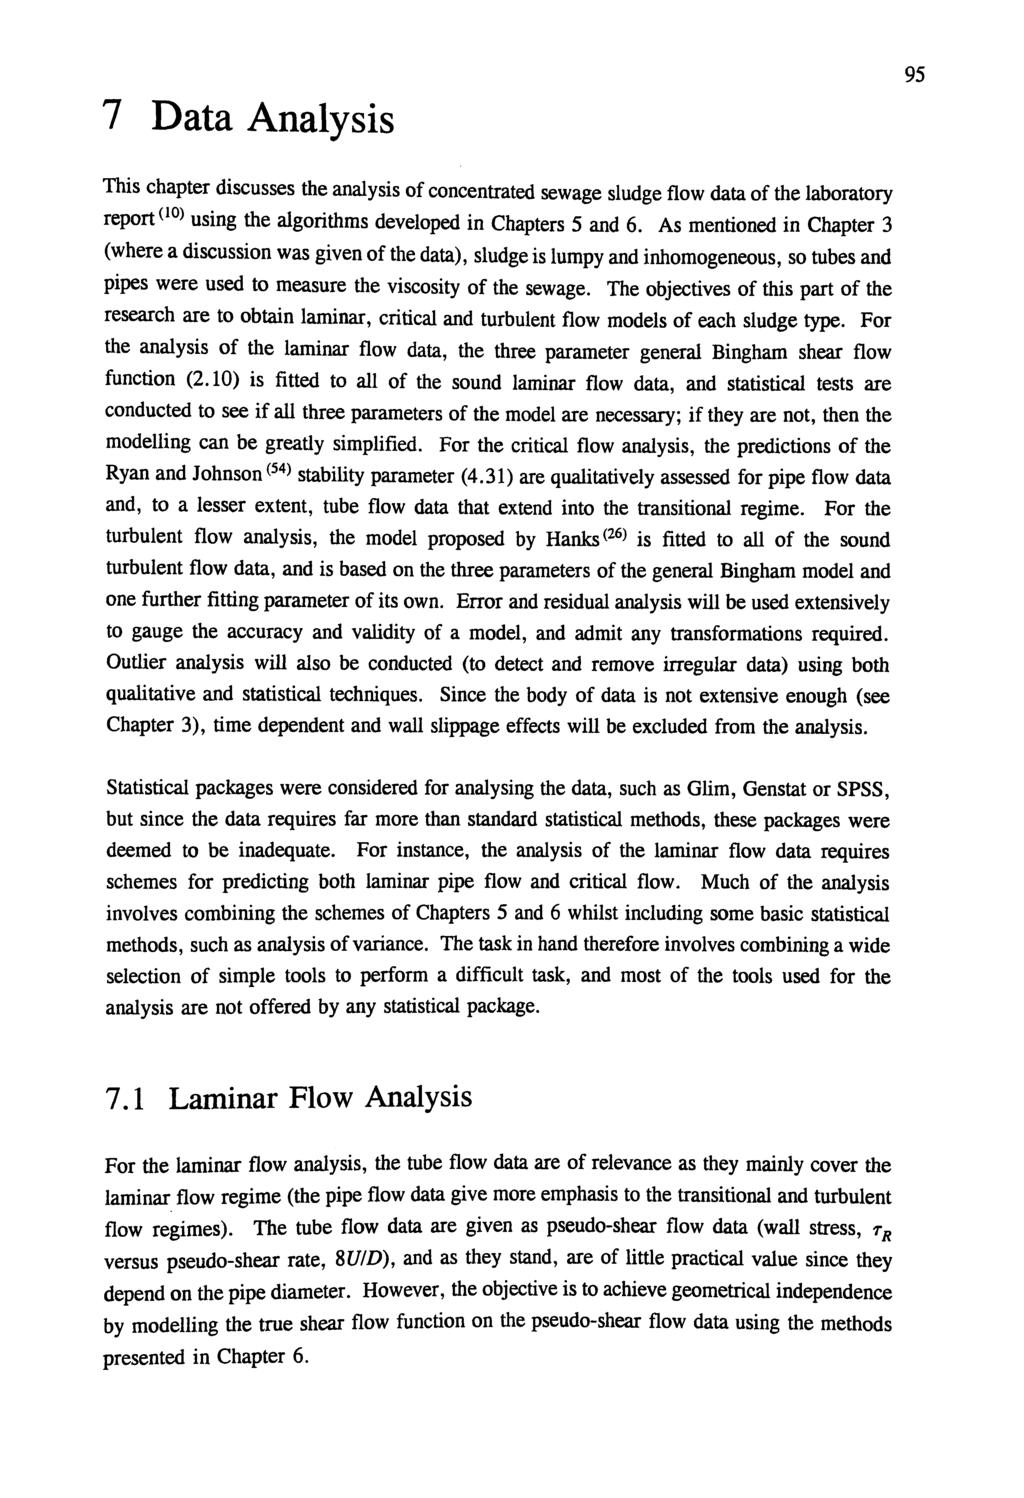 7 Data Analysis 95 This chapter discusses the analysis of concentrated sewage sludge flow data of the laboratory report (10) using the algorithms developed in Chapters 5 and 6.